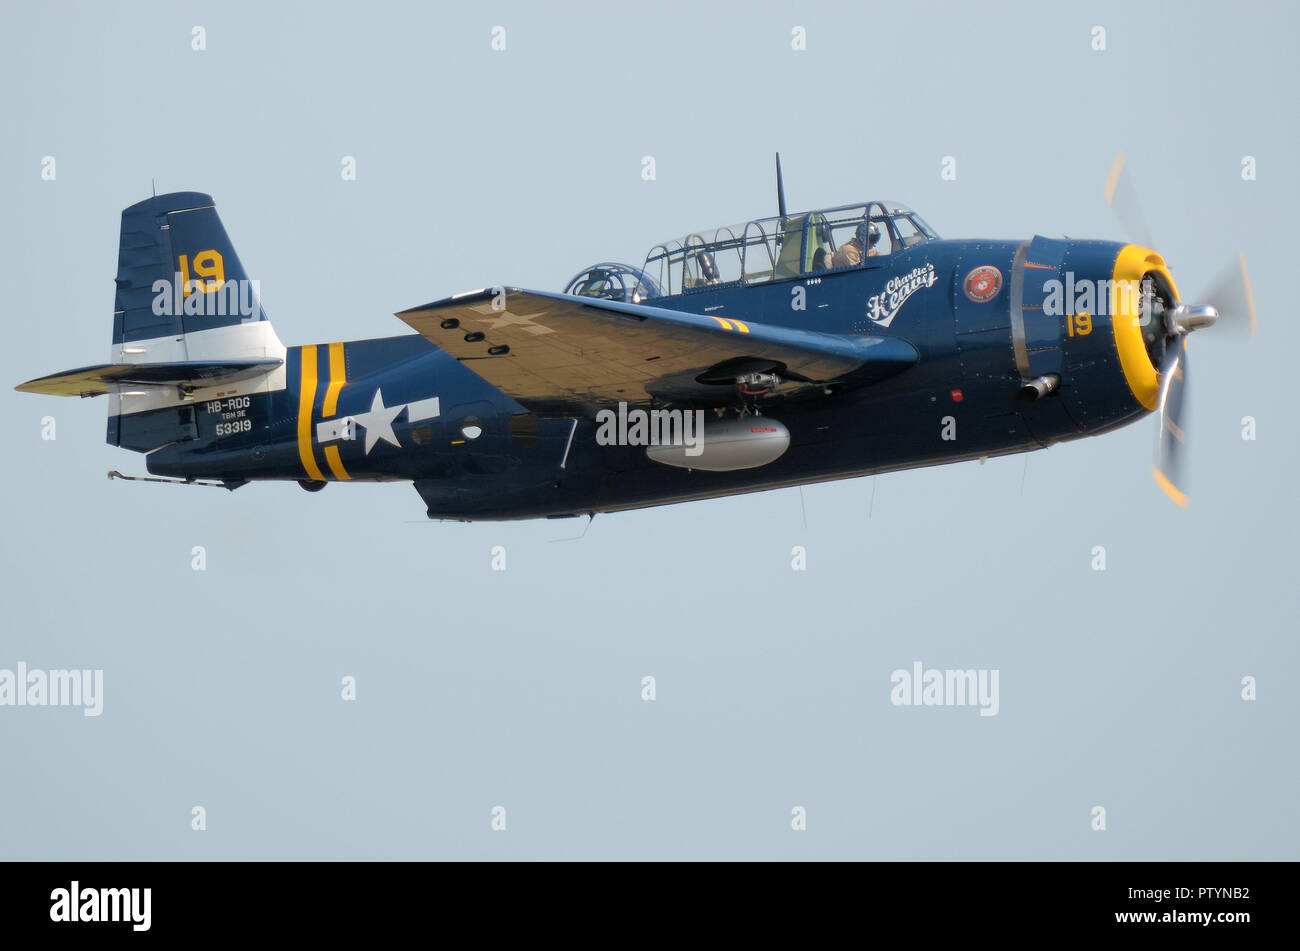 Grumman TBM Avenger Second World War torpedo bomber plane in US Navy colours, colors, flying at an airshow Stock Photo